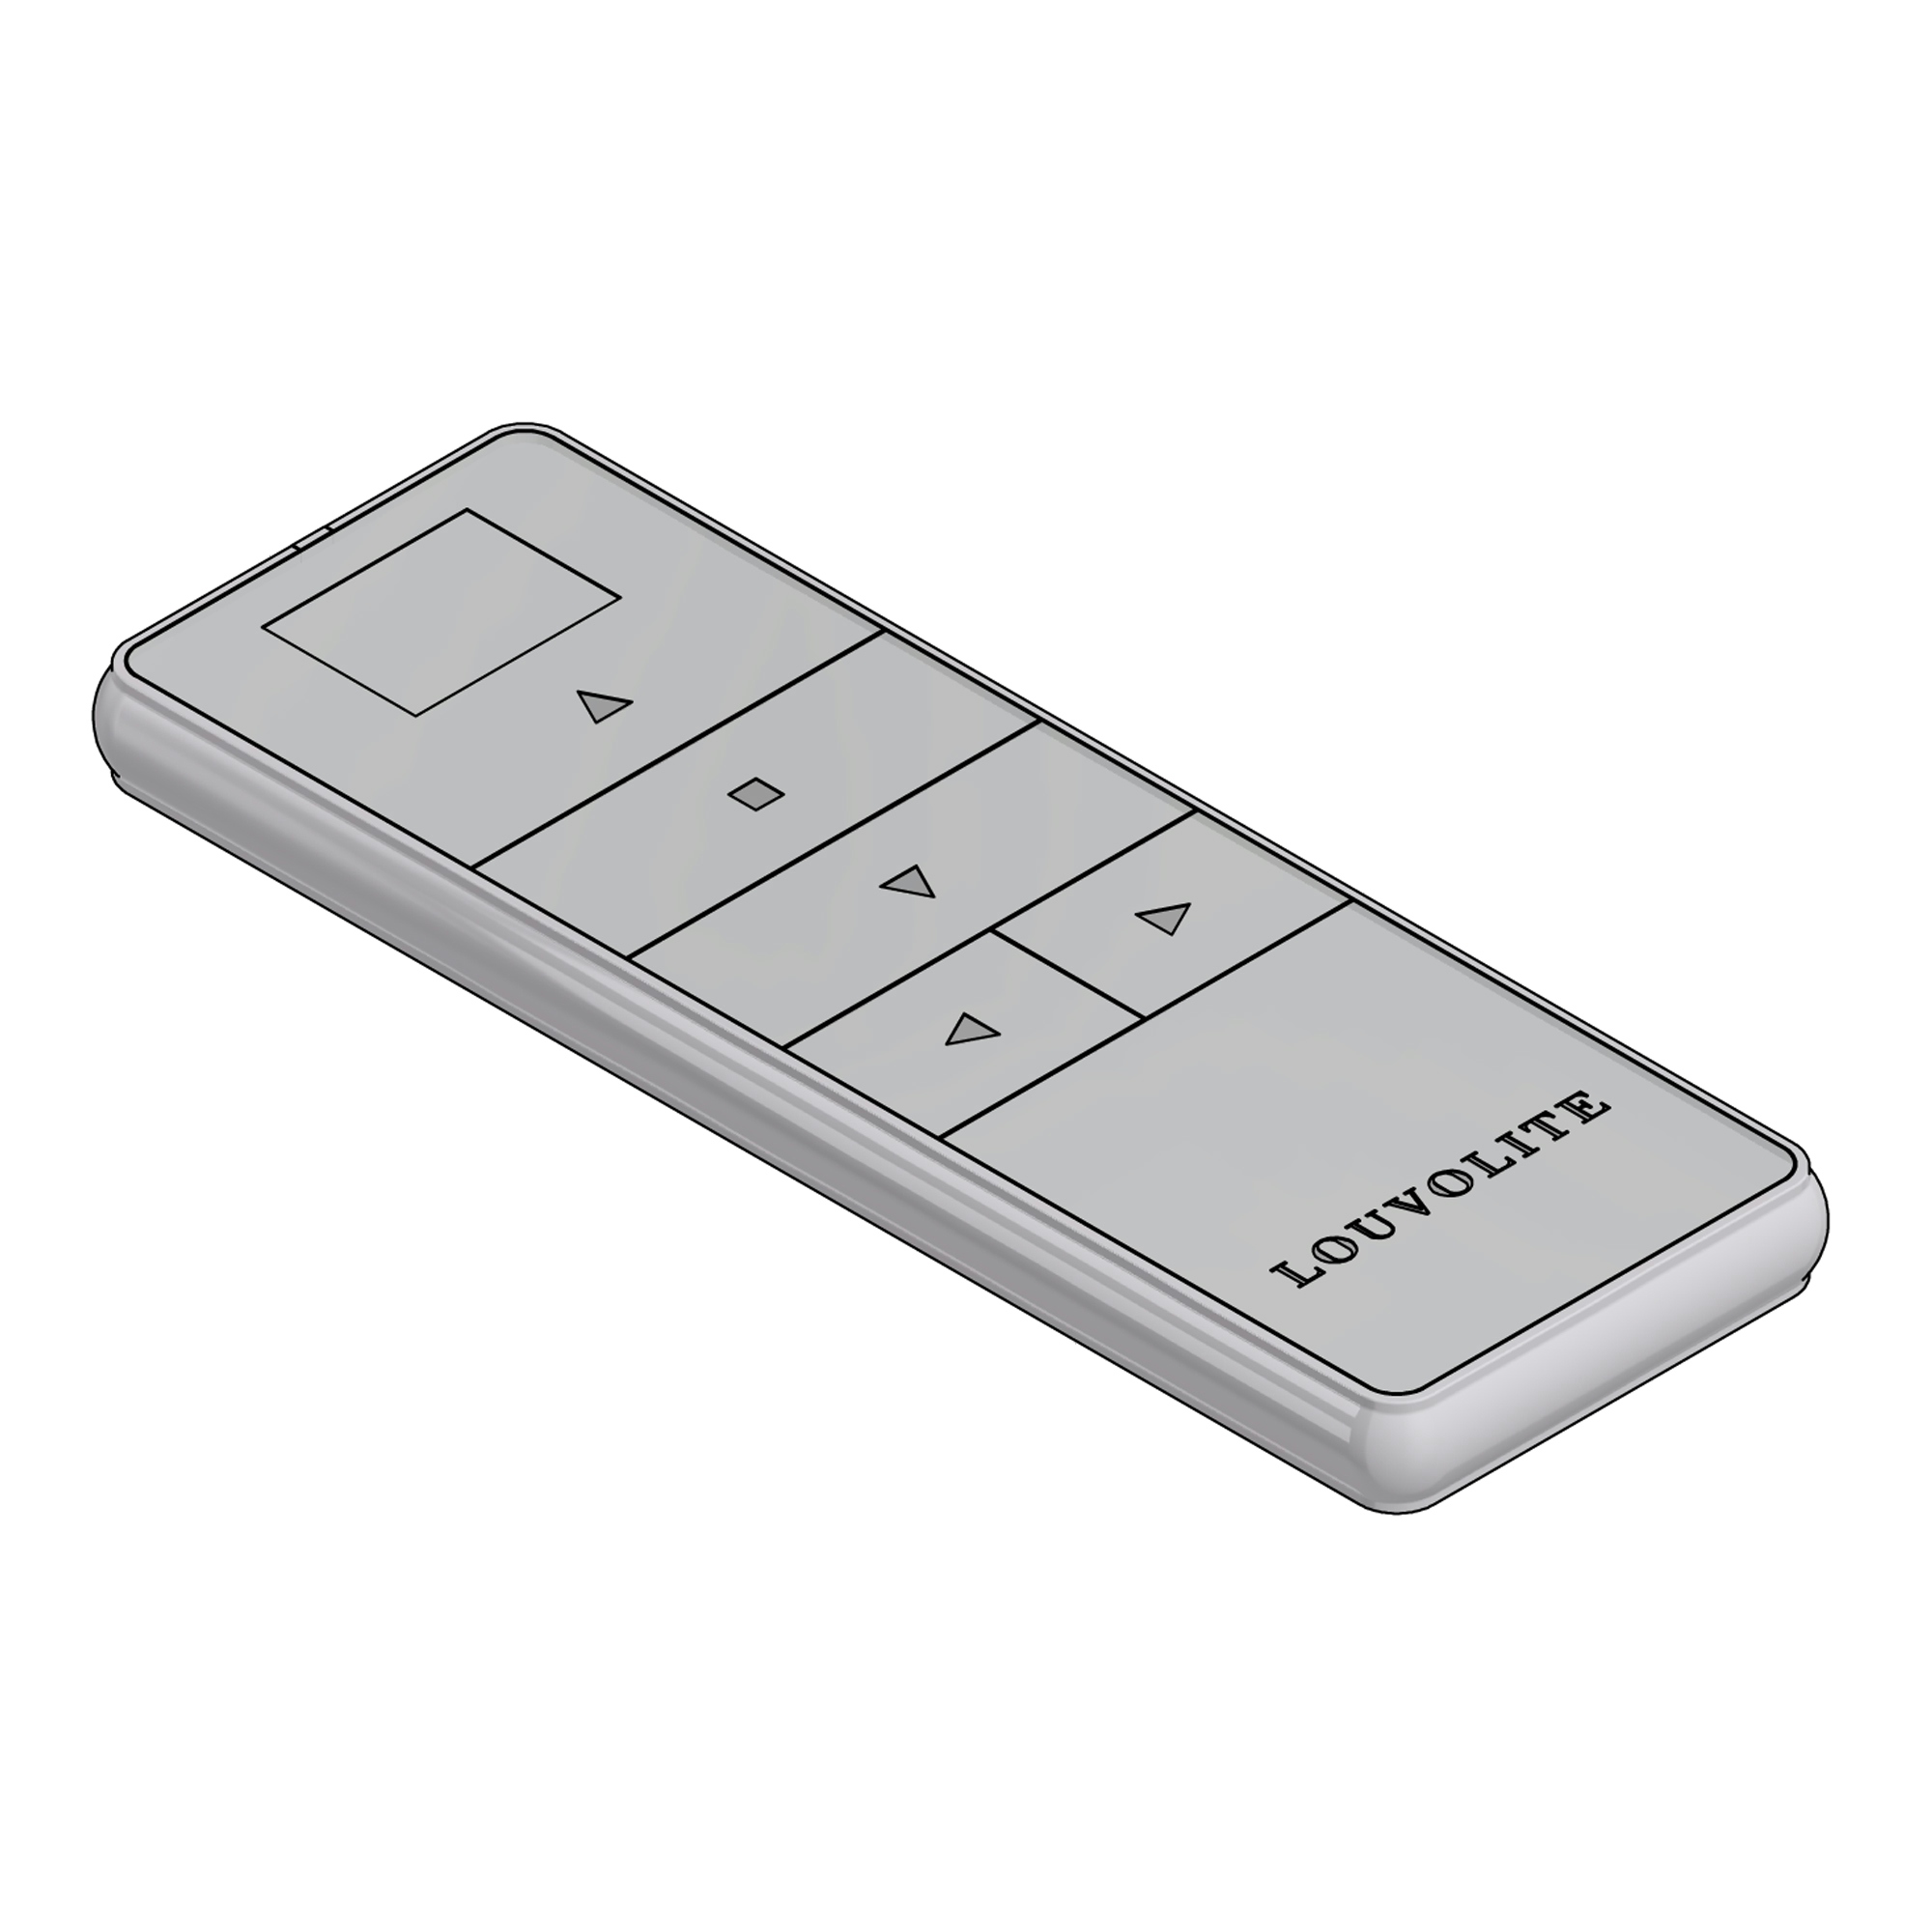 6 CHANNEL REMOTE FOR R1912 & R1918